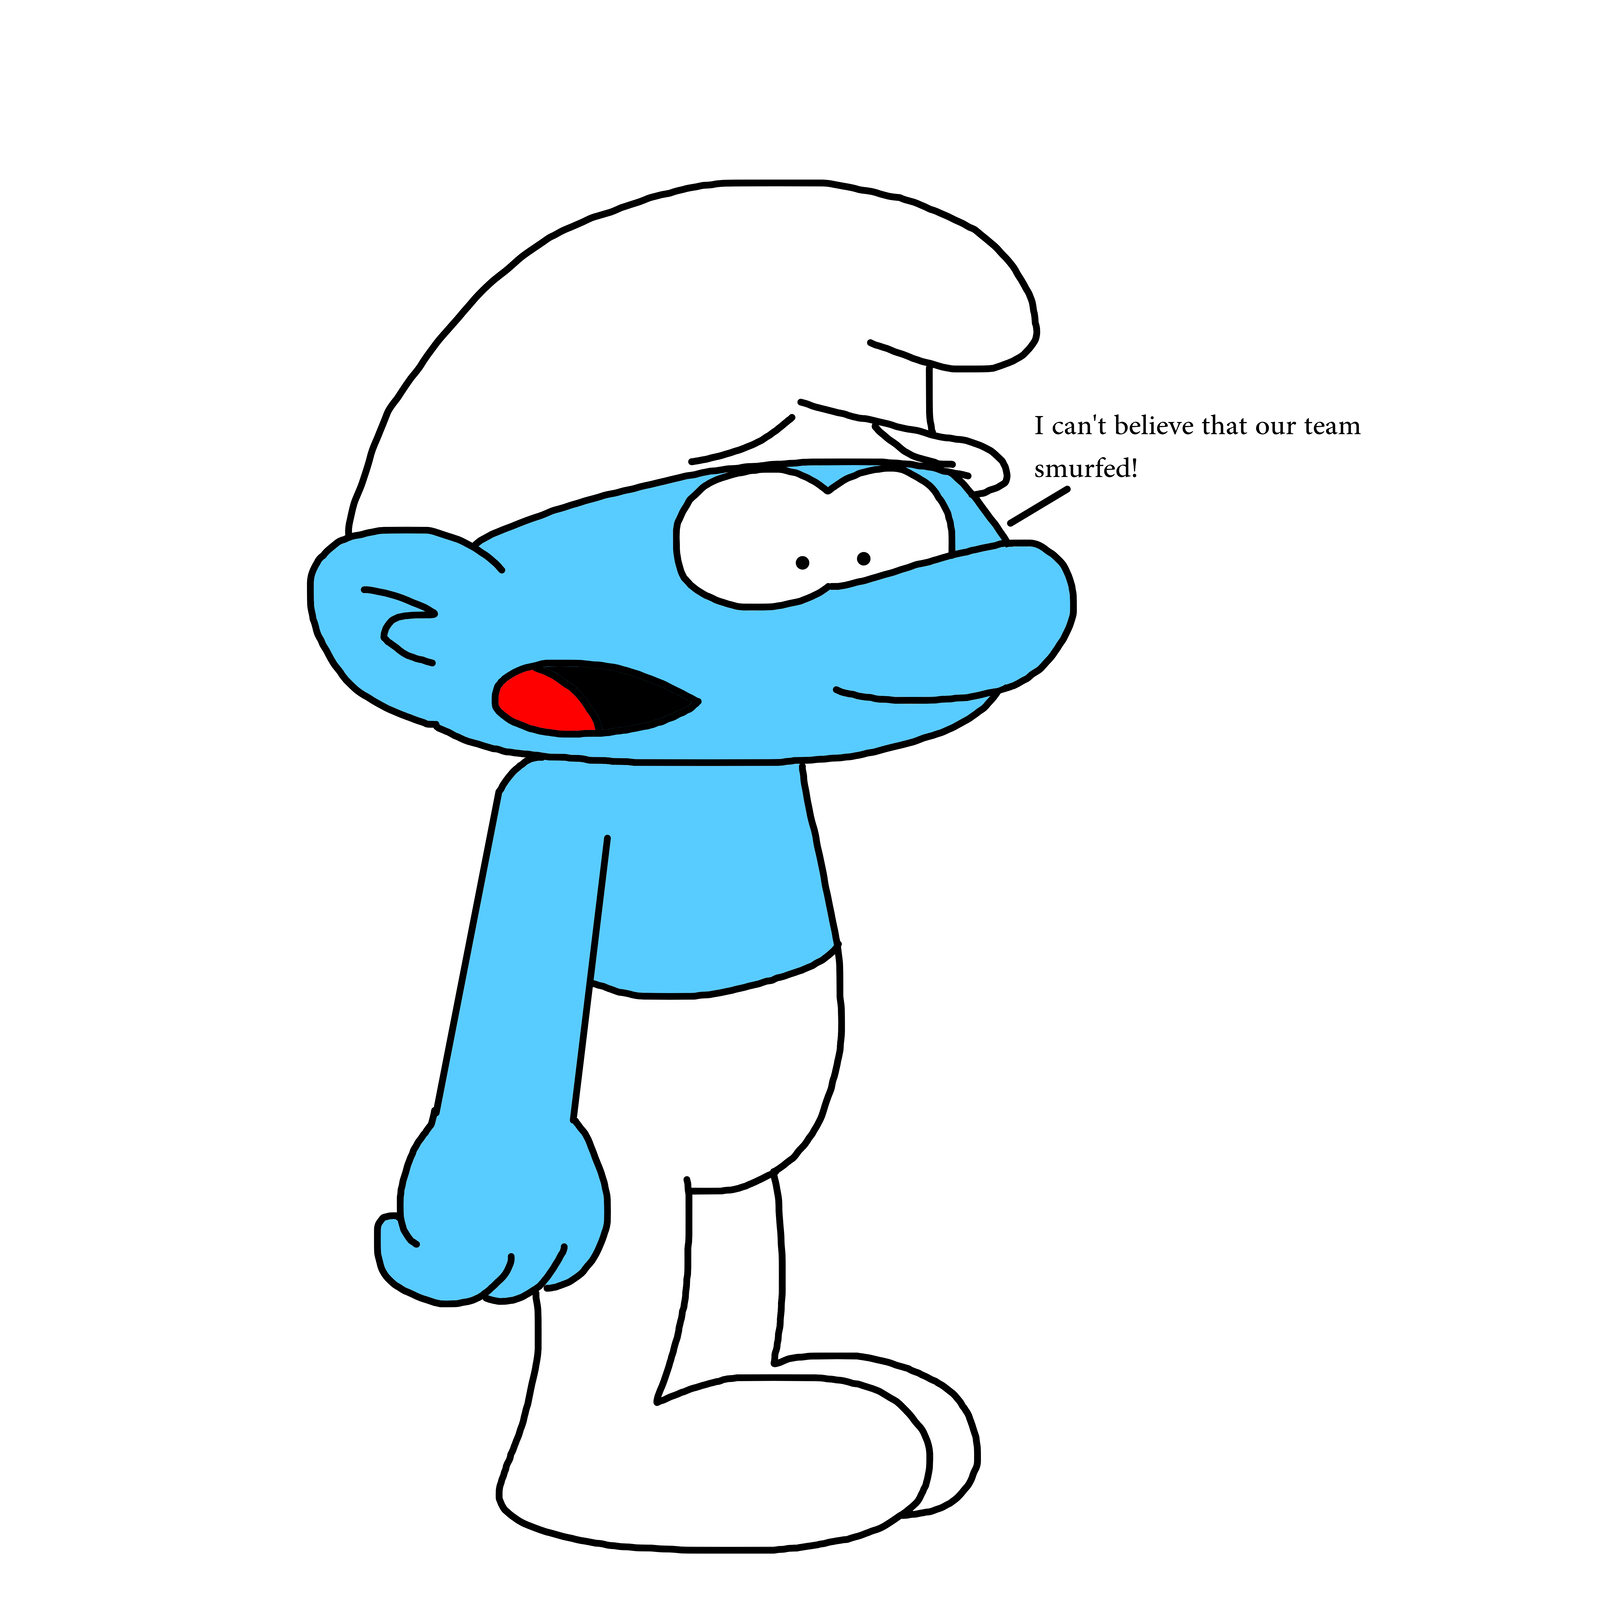 Smurf Sad For Belgium Losing At FIFA World Cup By MarcosPower1996 On.